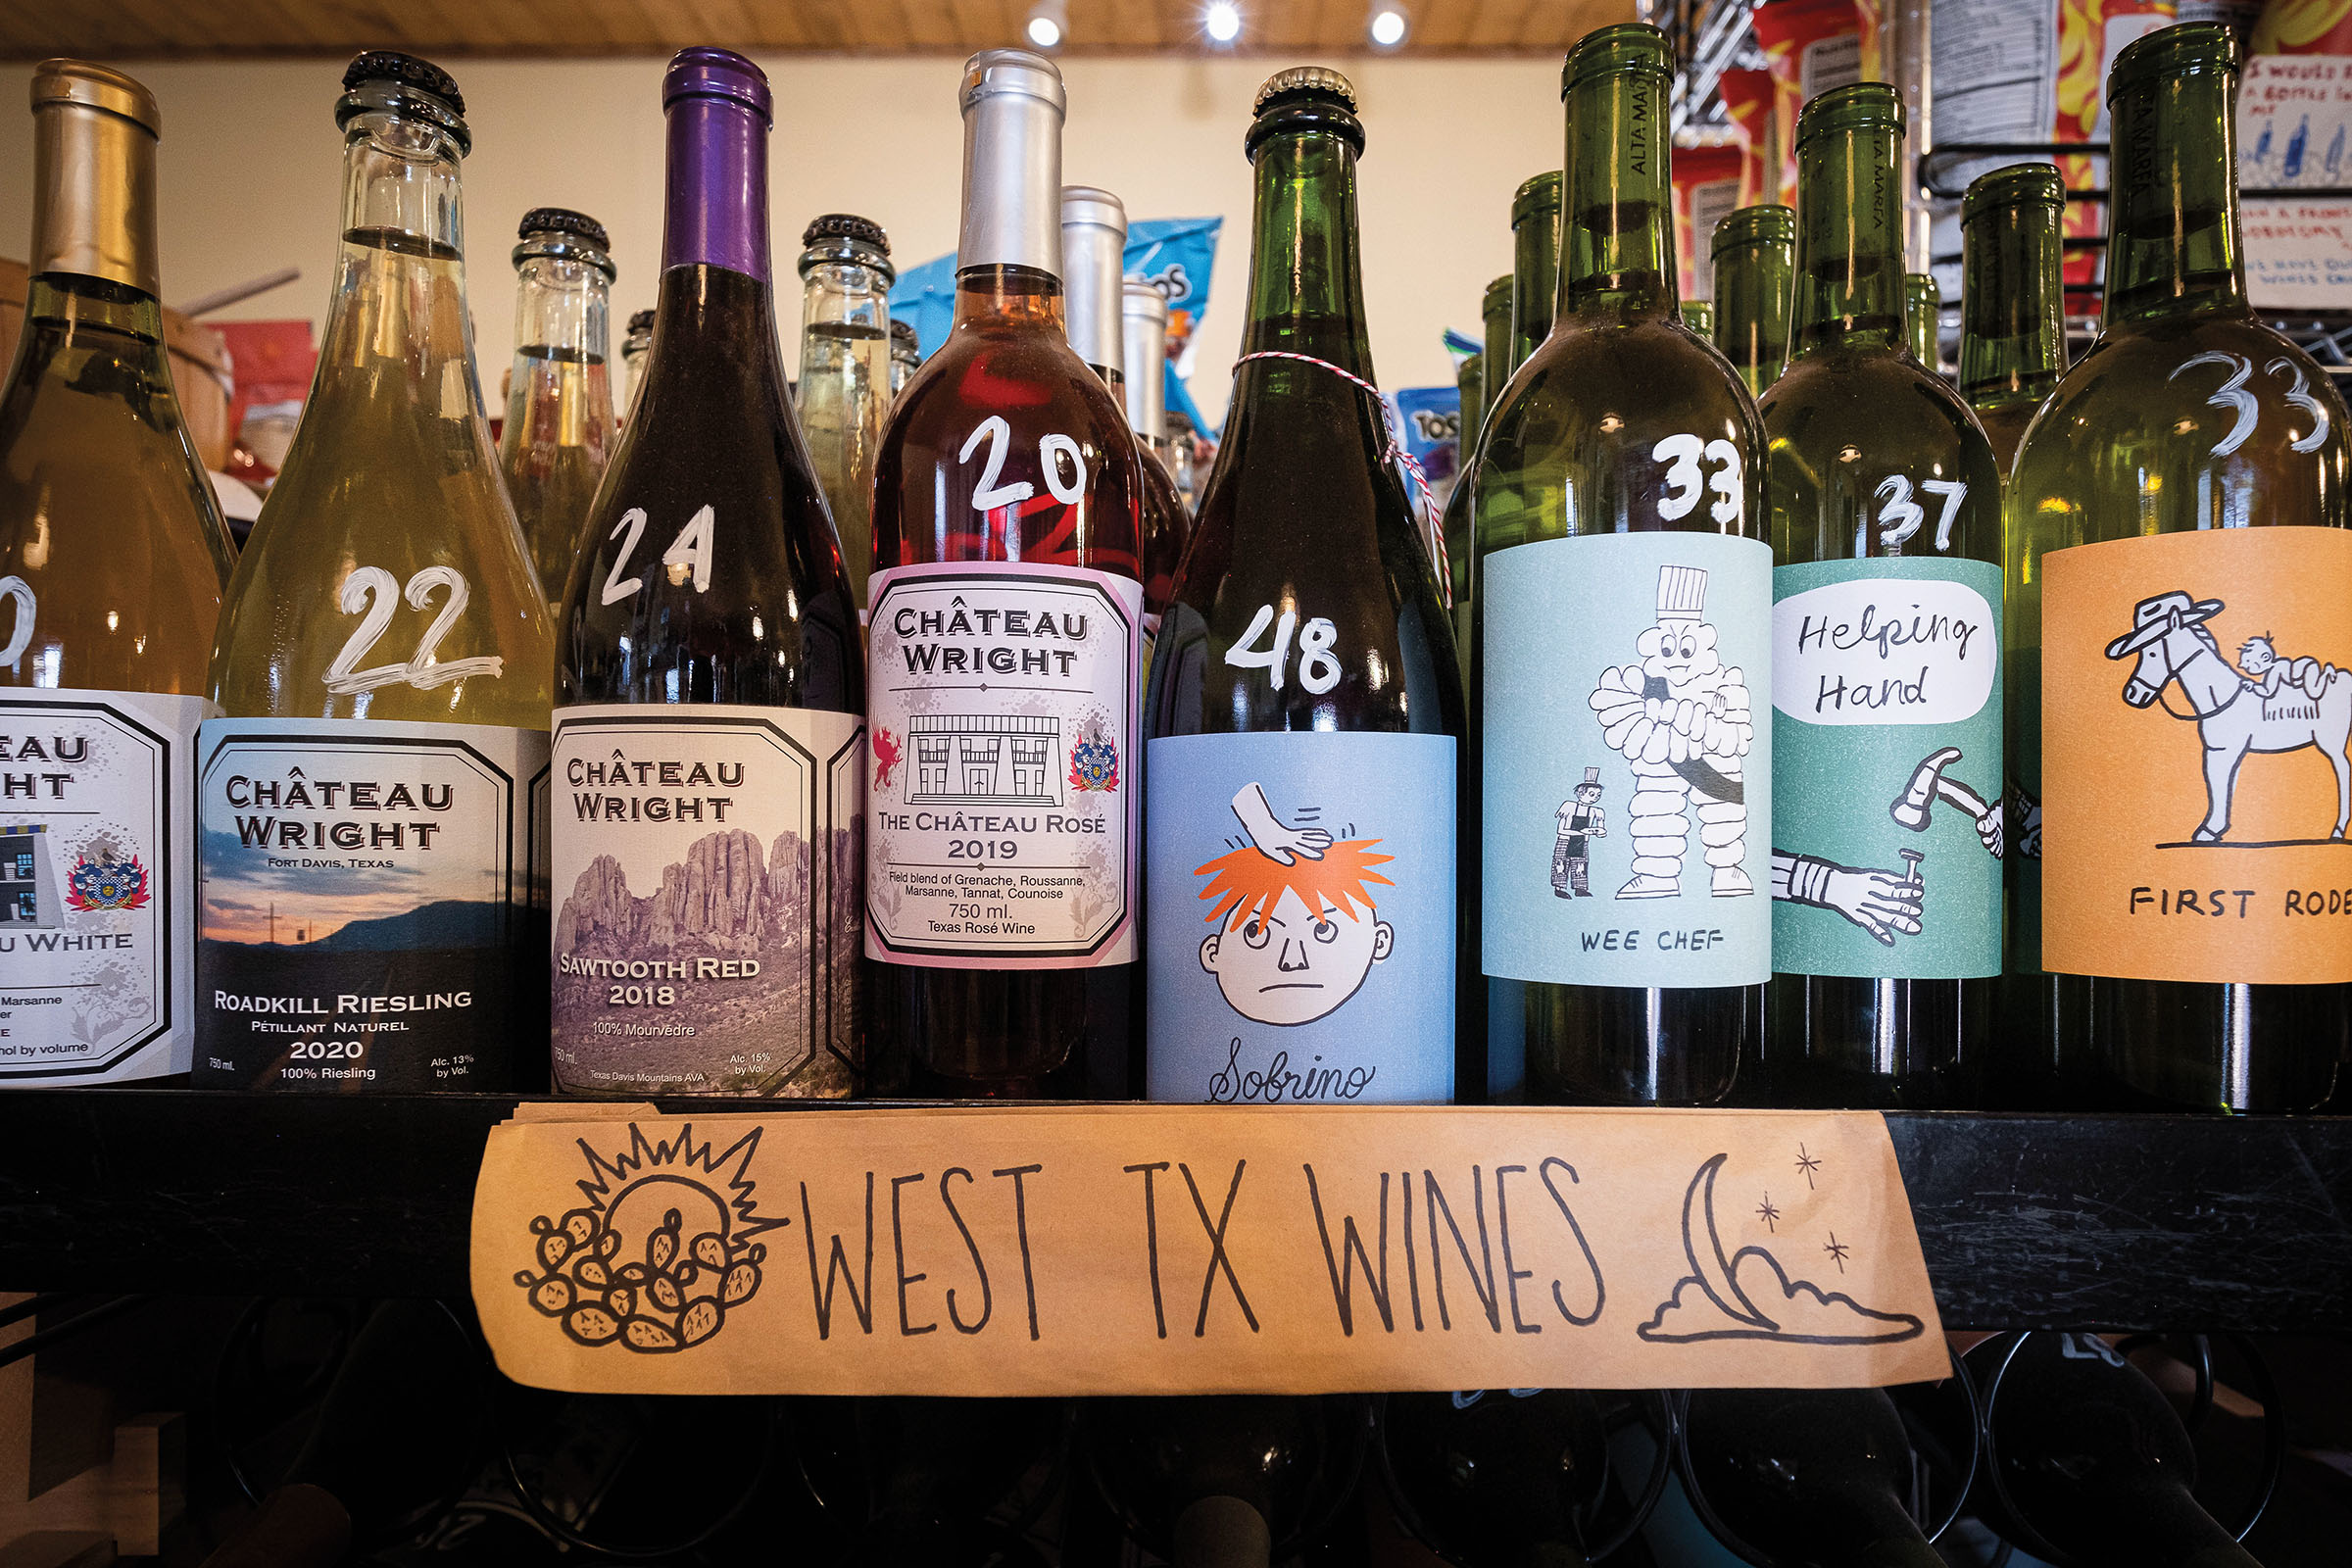 A collection of different color wine bottles behind a wooden sign reading "West TX Wines"